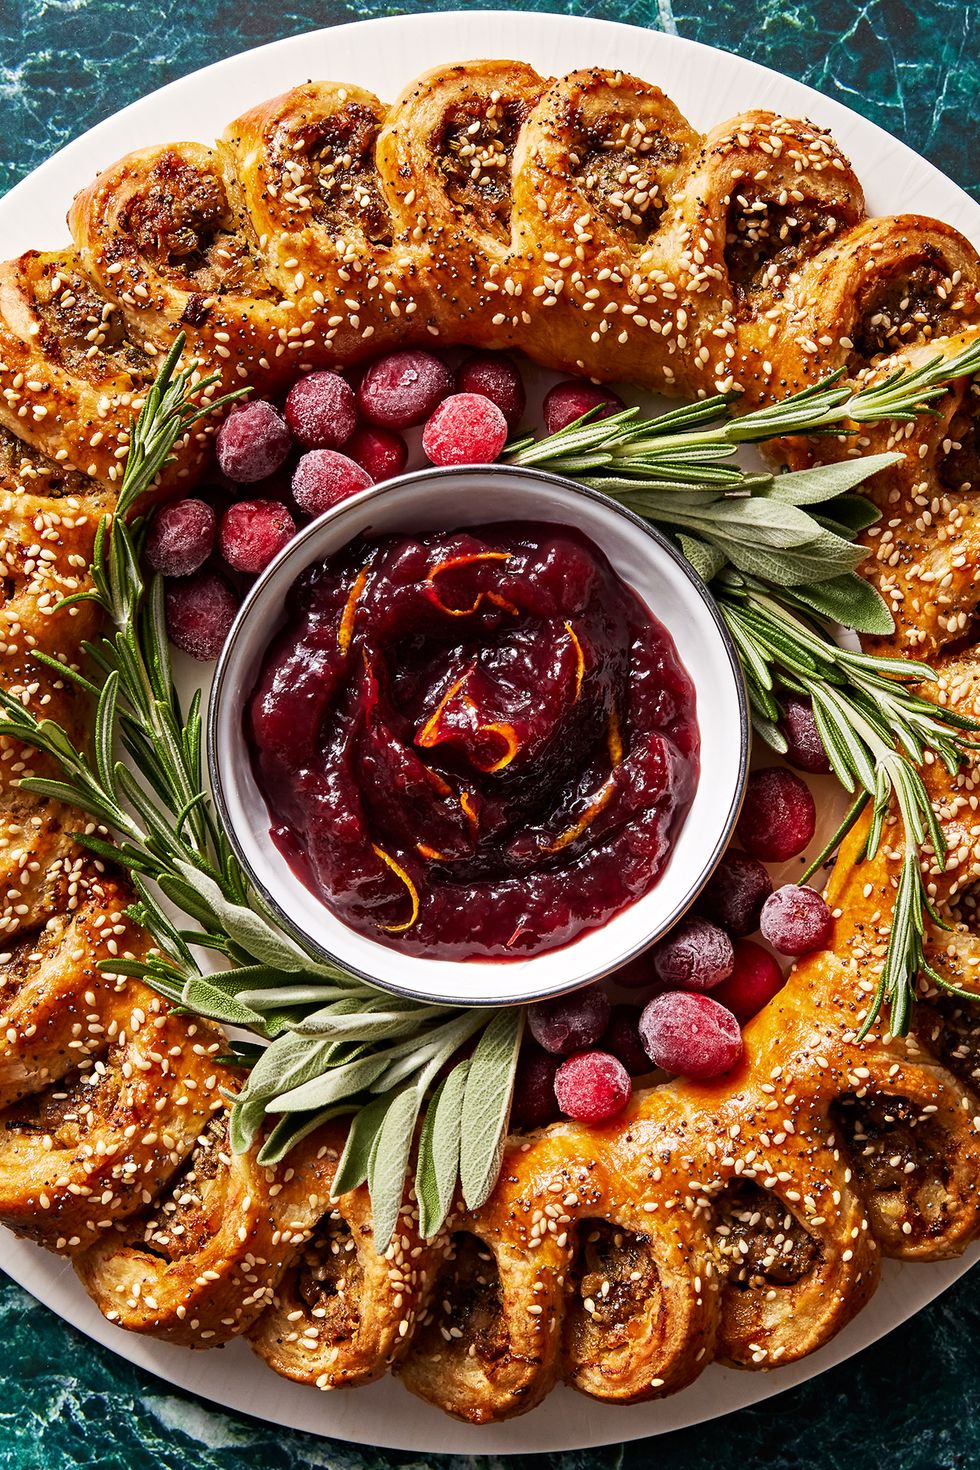 sausage roll wreath with cranberry sauce for dipping